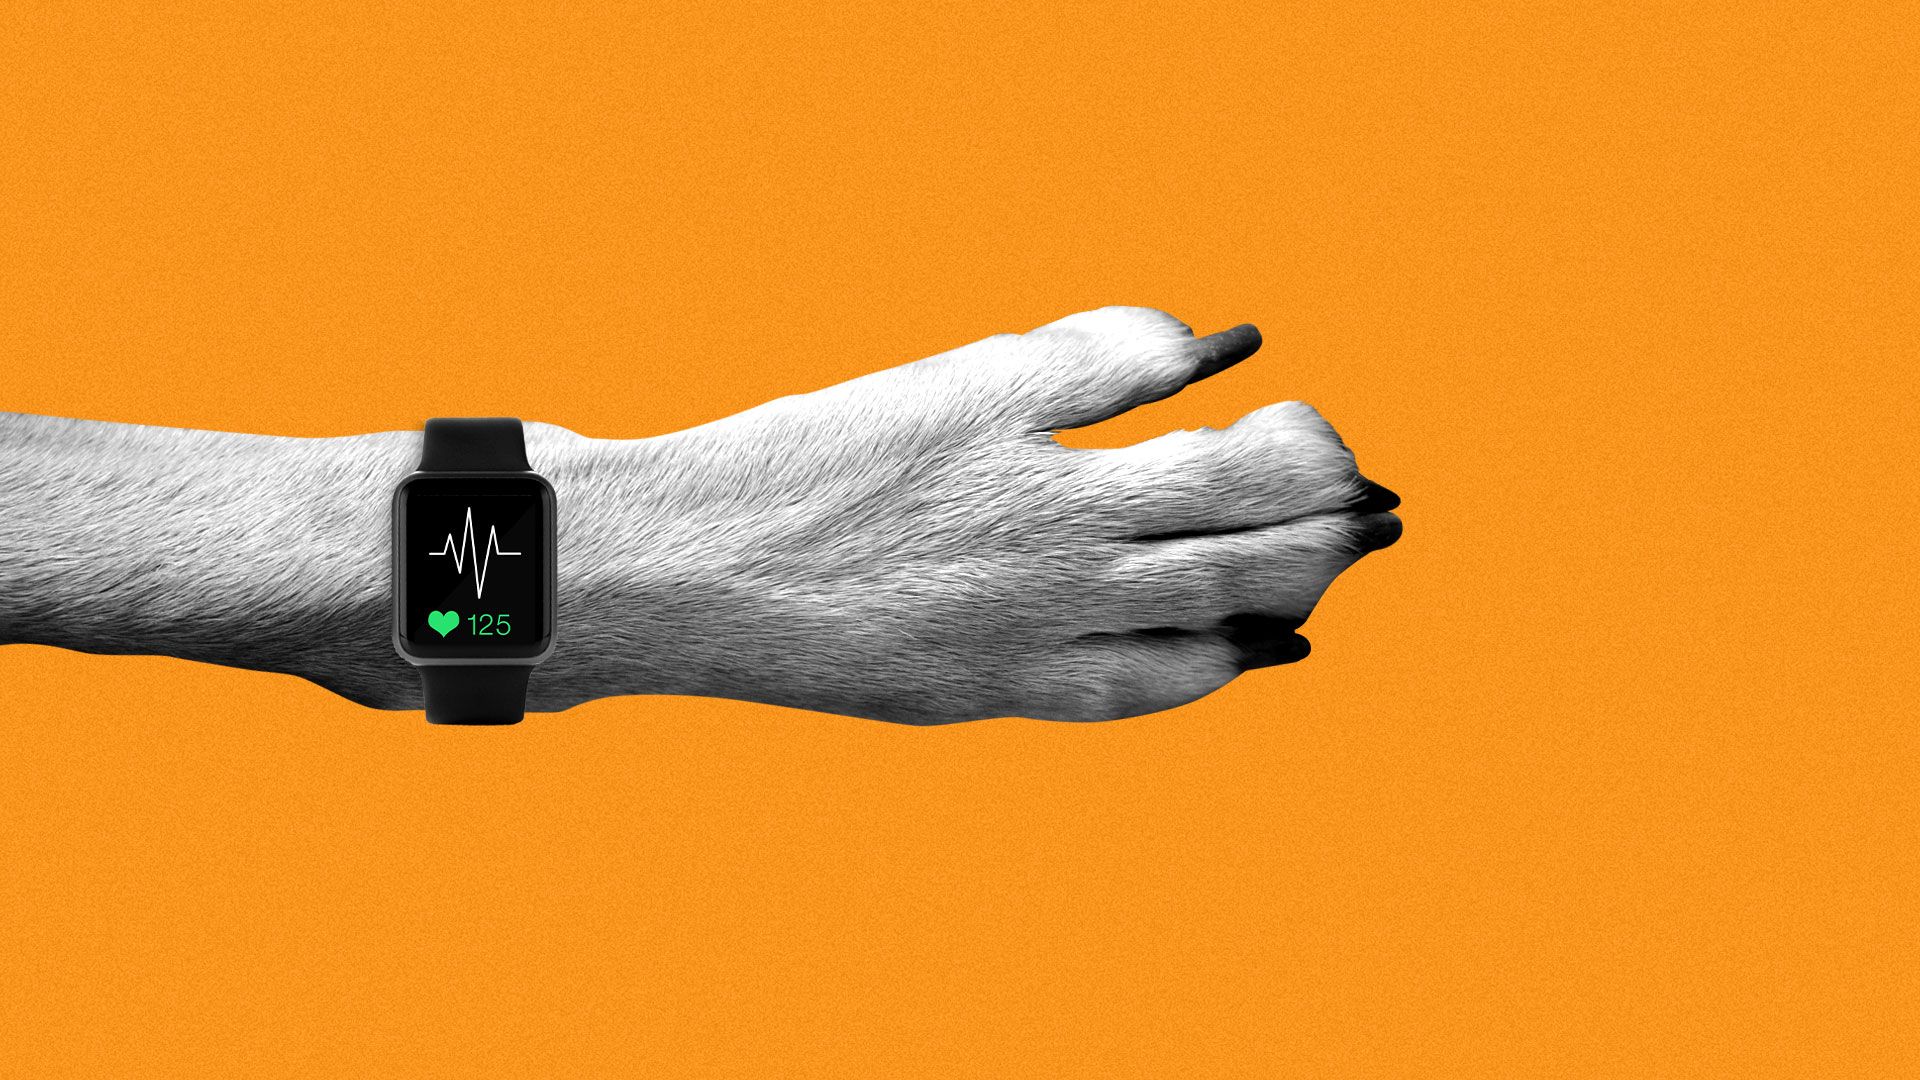 Illustration of dog paw wearing a smart watch. Smart watch has heart rate monitor on screen.